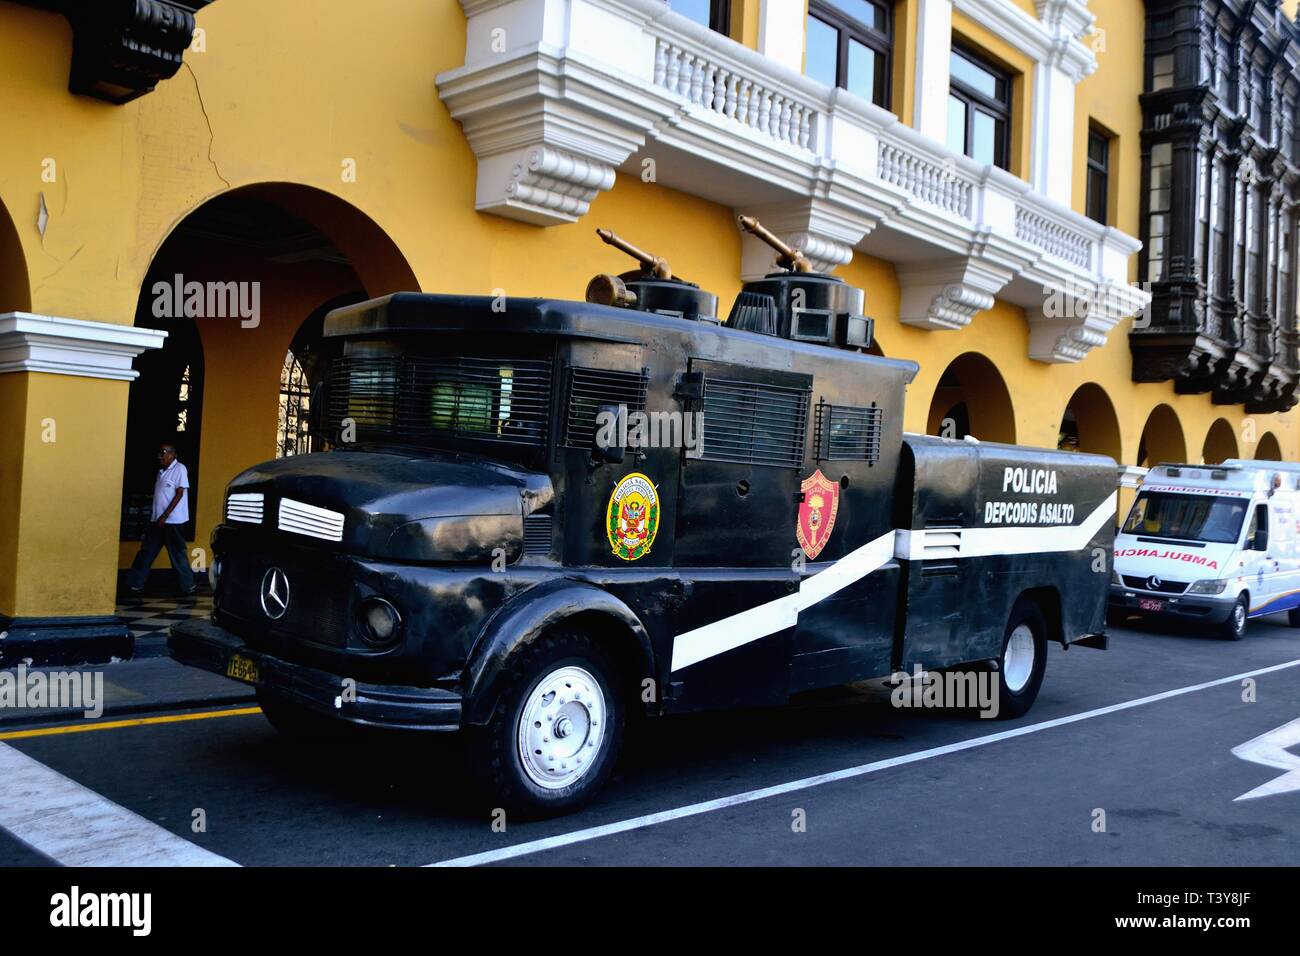 Police riot truck with water cannon  - Plaza de Armas in LIMA.-.PERU       											  					  			 	  	  			 	    	 Stock Photo